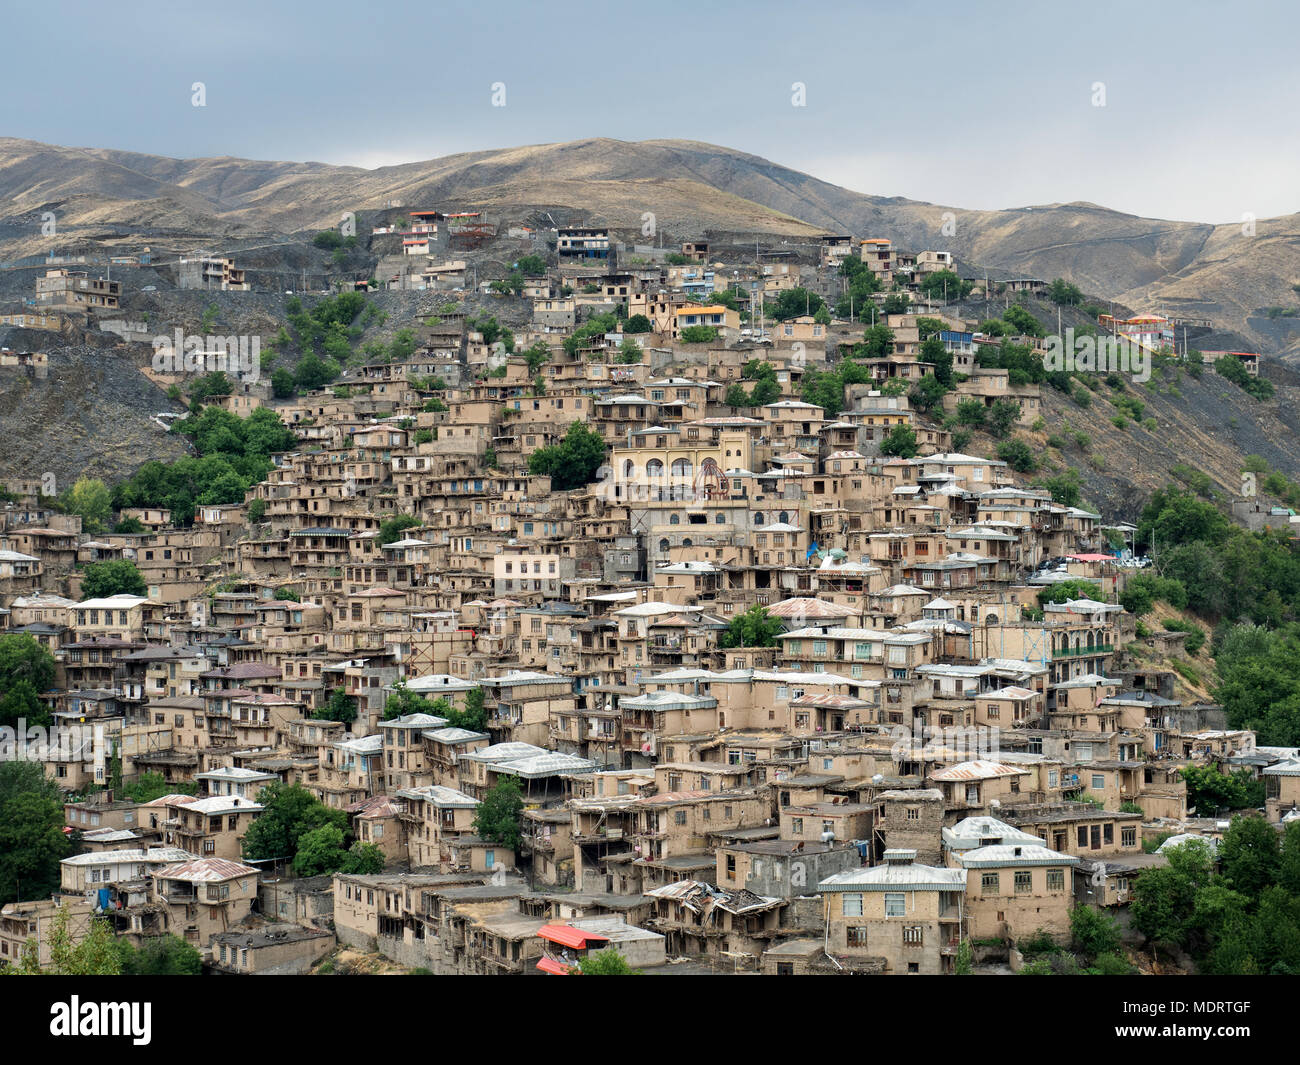 Kang, old stepped village in northern Iran Stock Photo